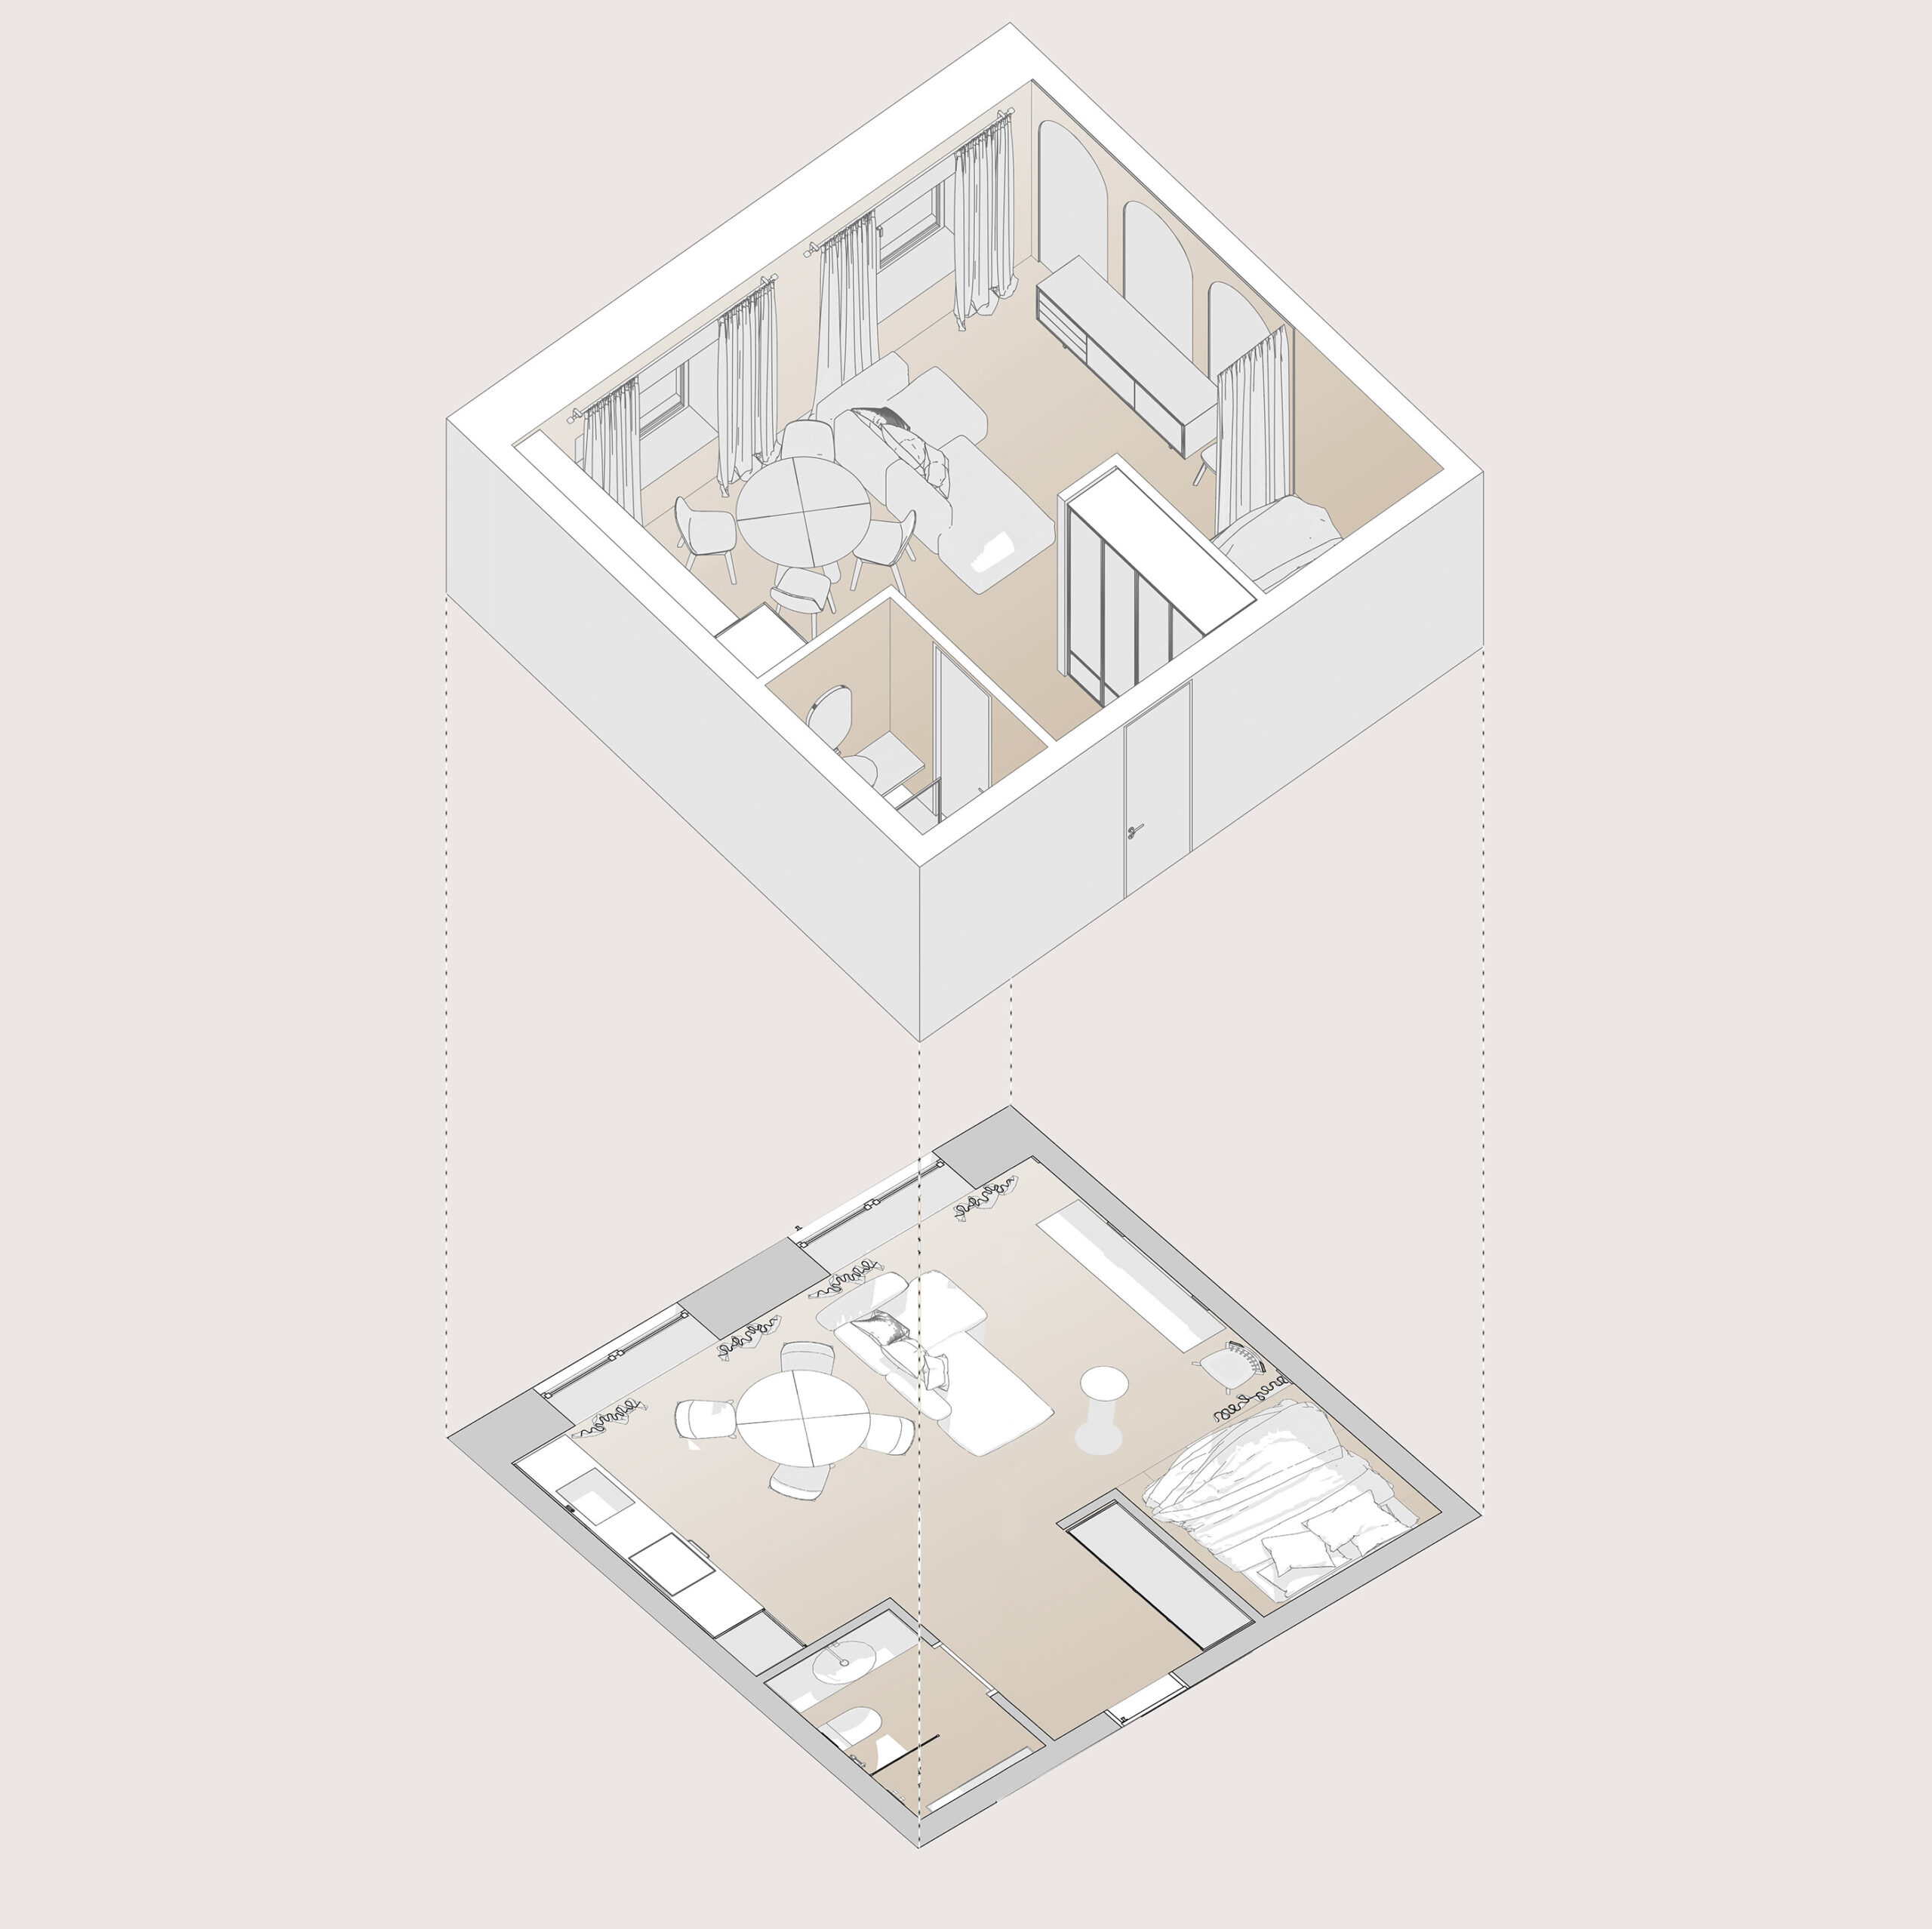 General layout of the apartment